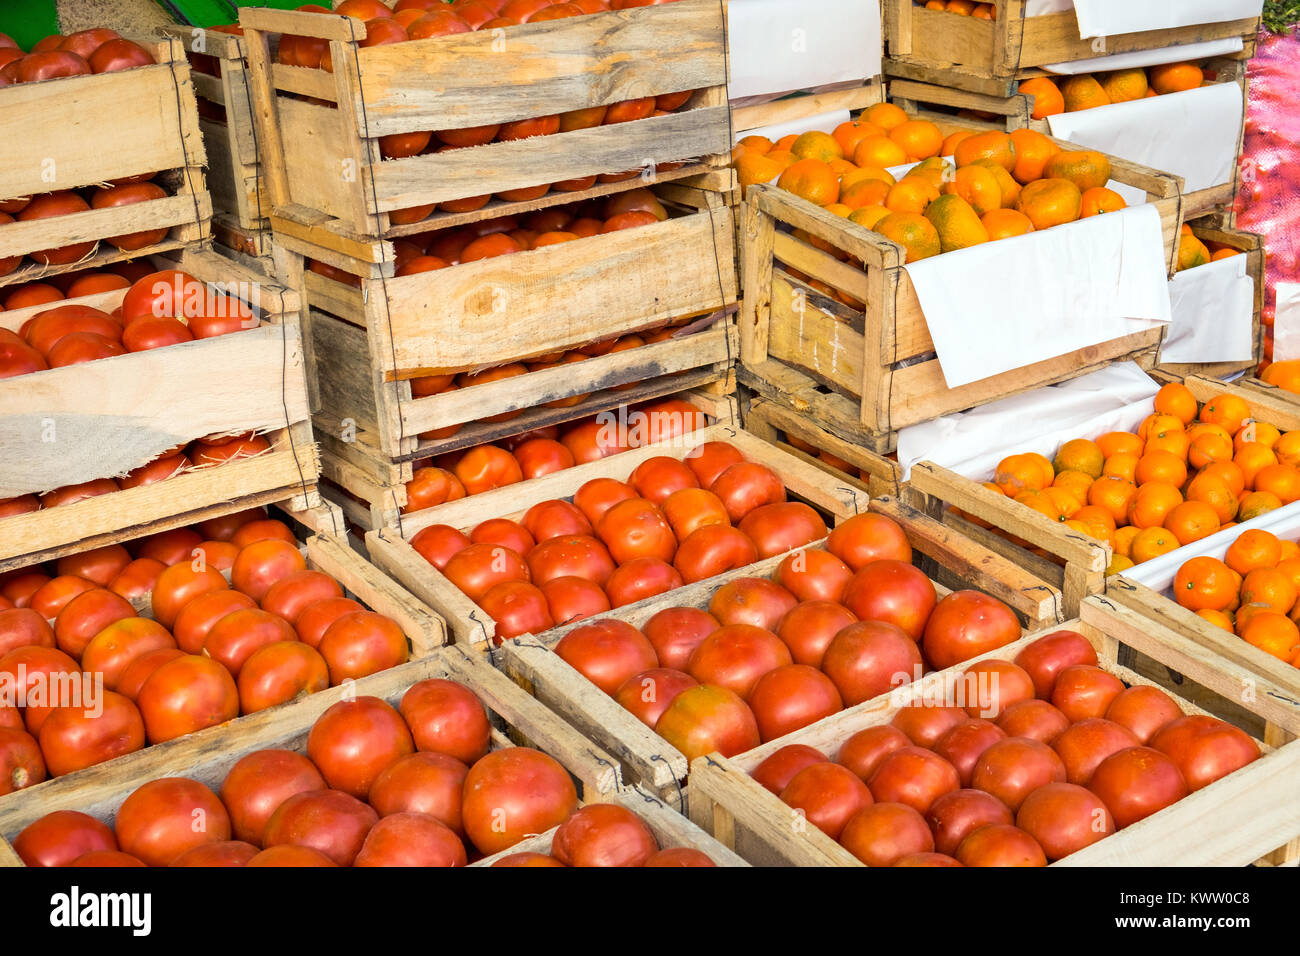 Tomatoes and tangerines in wooden boxes for sale at a market in Valparaiso, Chile Stock Photo